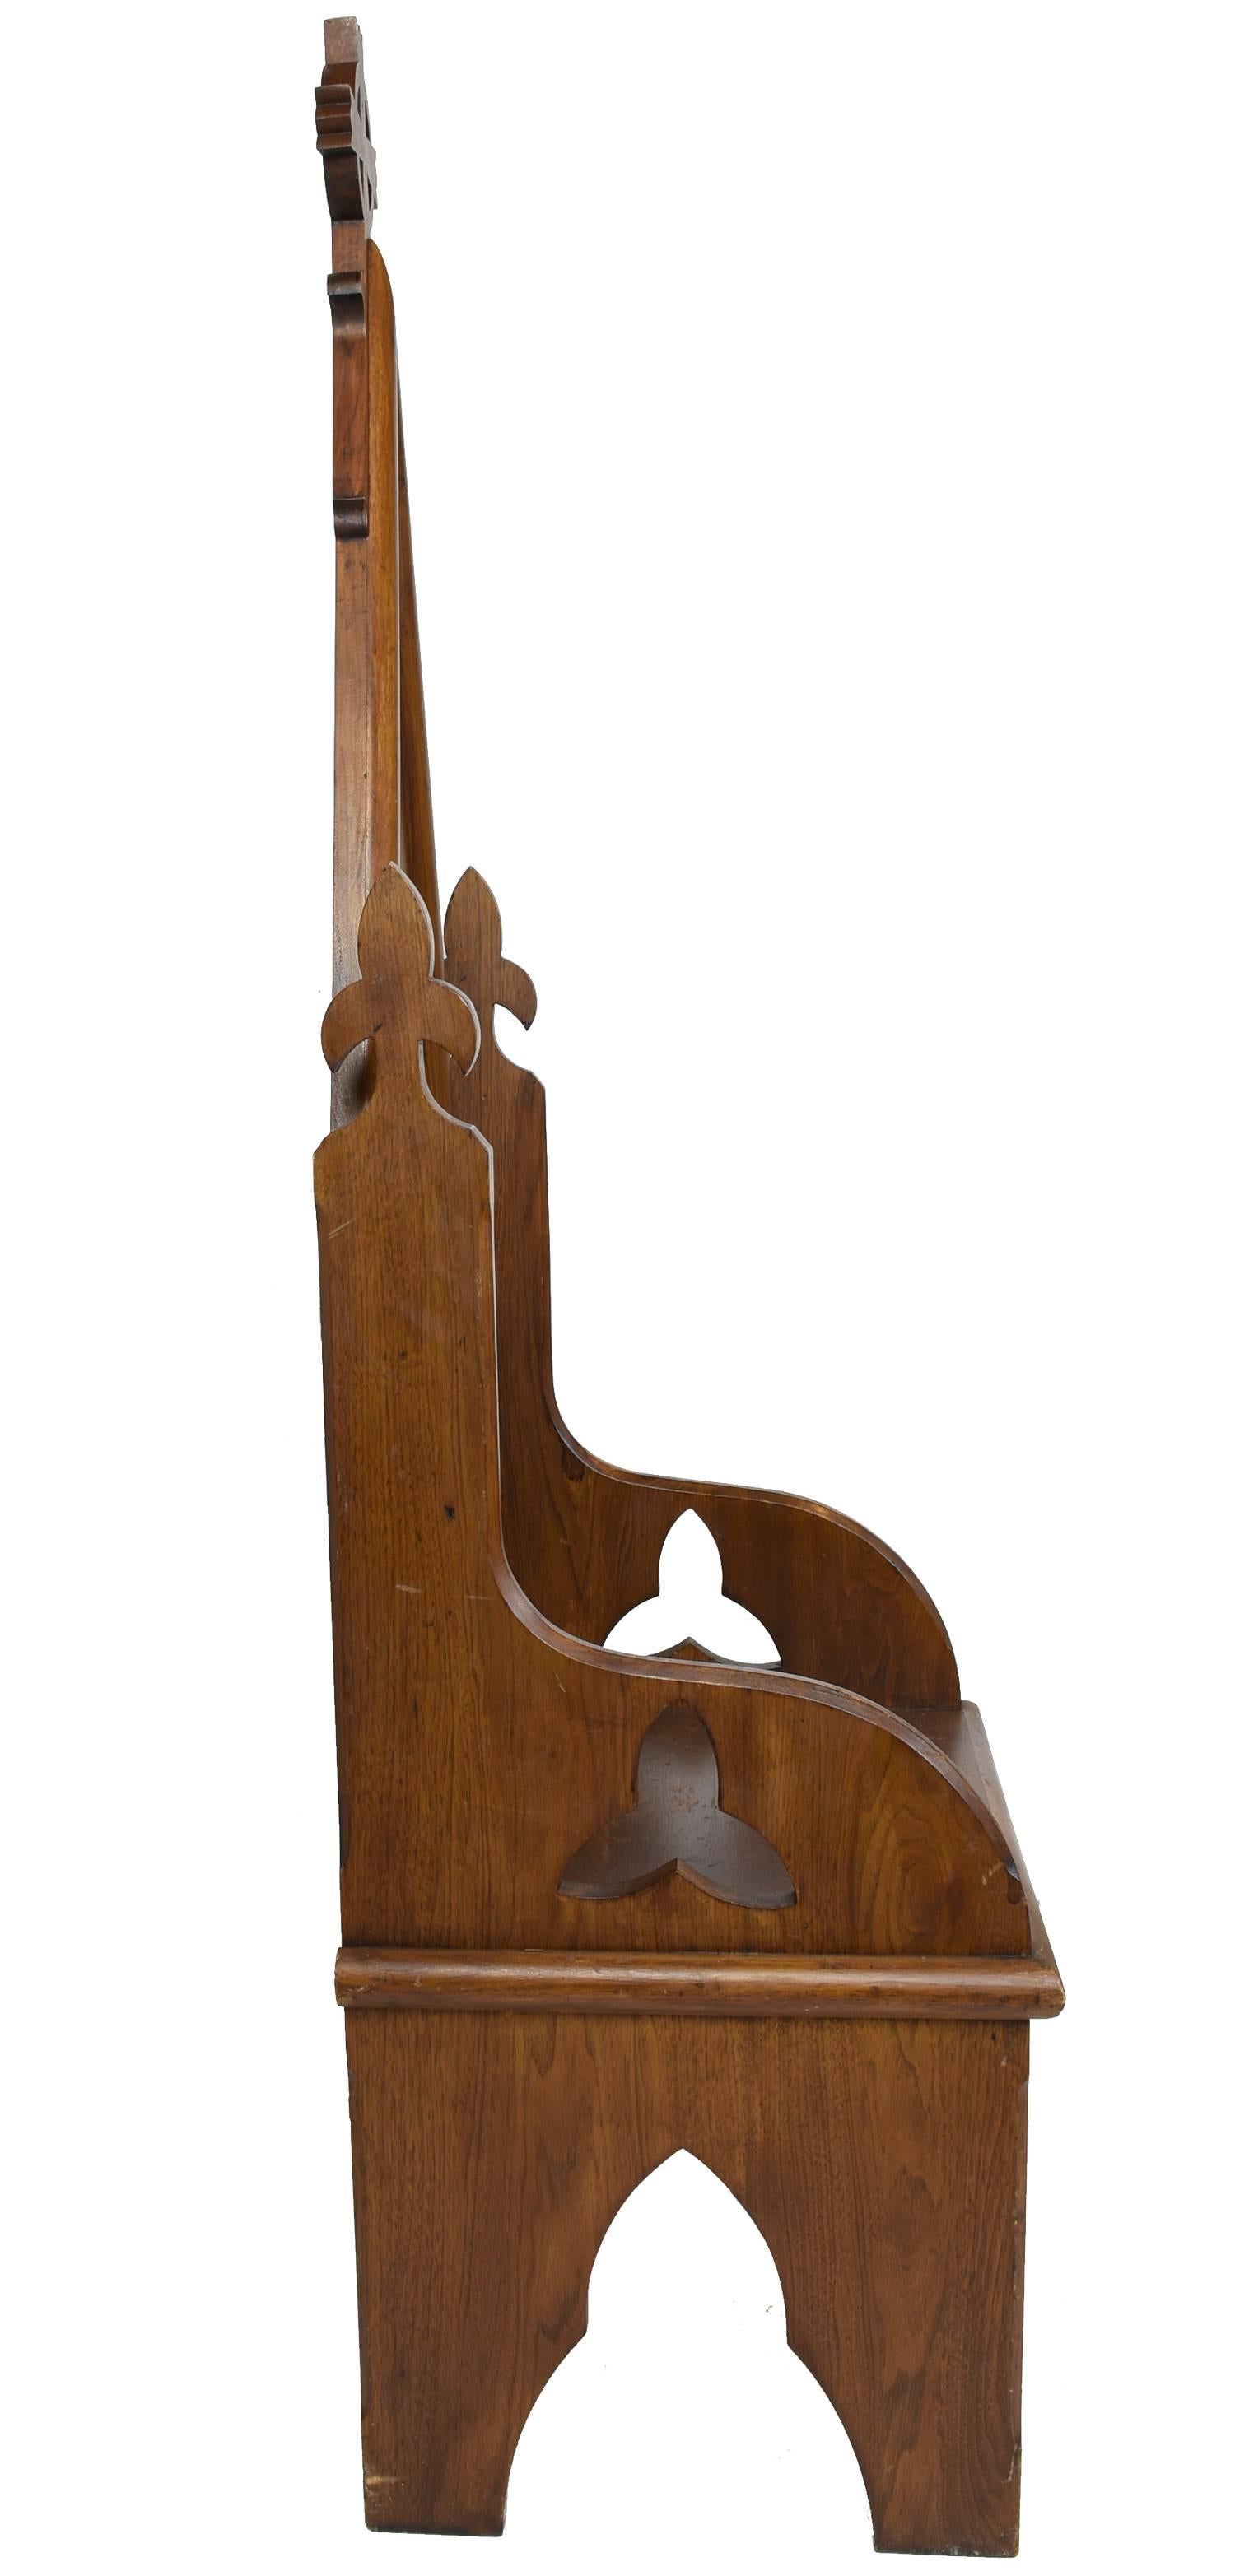 Gothic Revival Early 20th Century Oak Bishop's Chair with Vaulted Back and Trefoil Designs